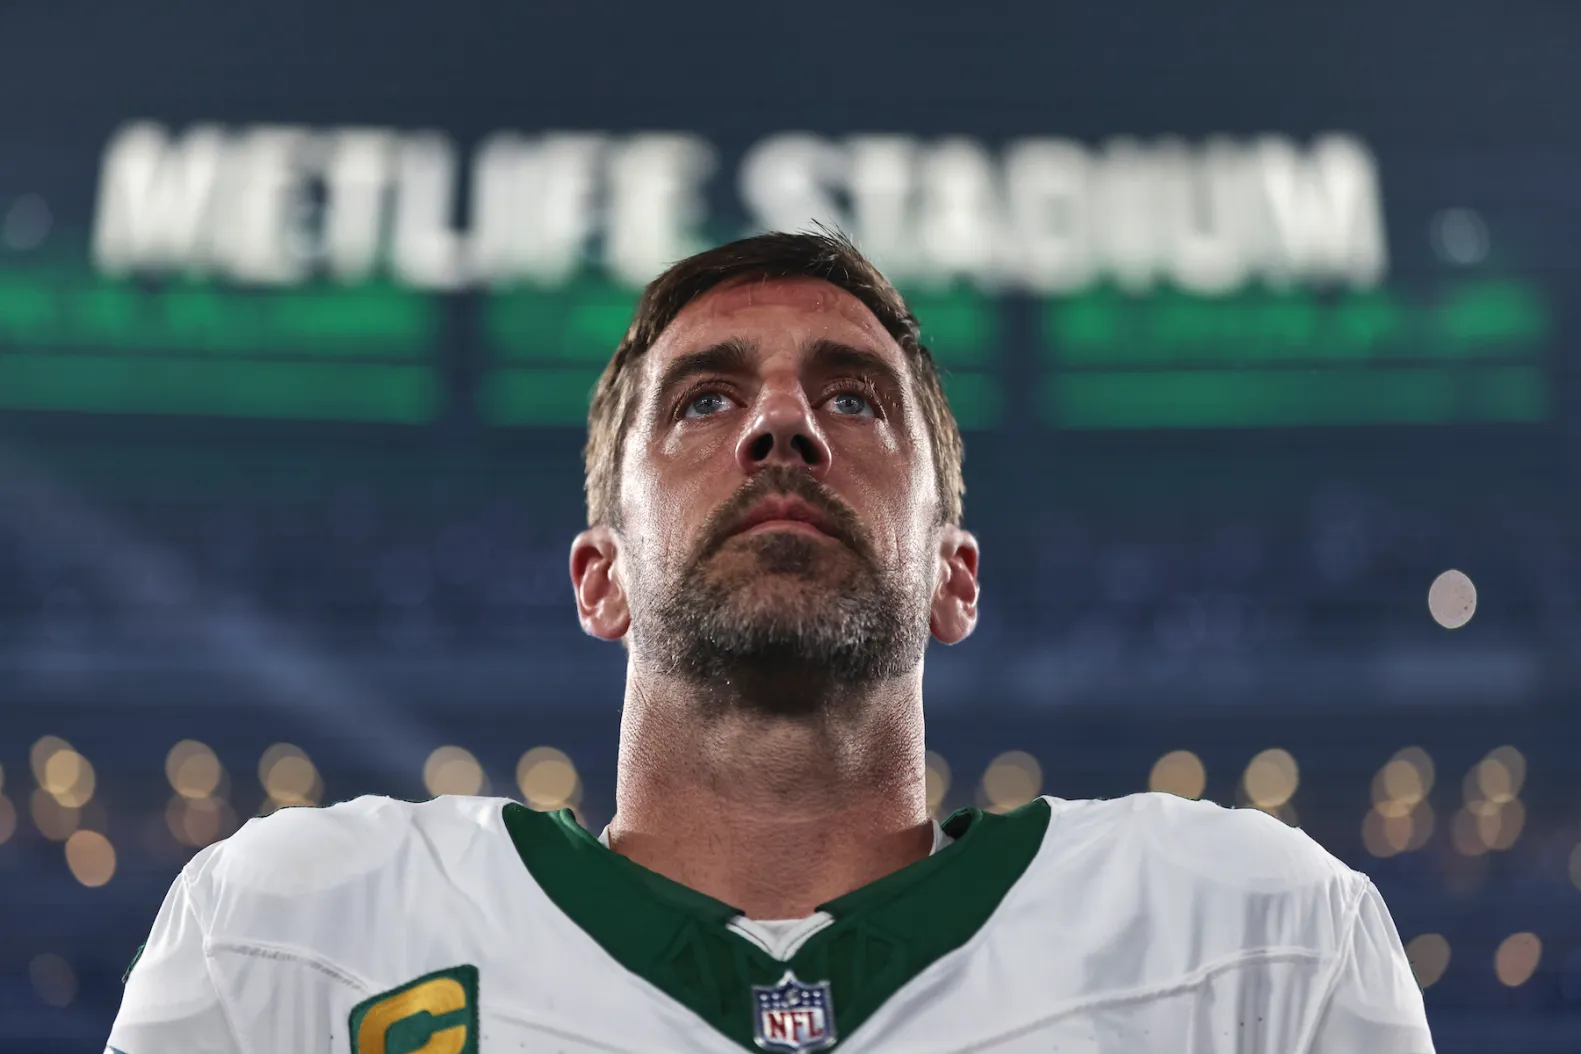 Aaron Rodgers and the Jets: A Mission to Revamp for Super Bowl Glory